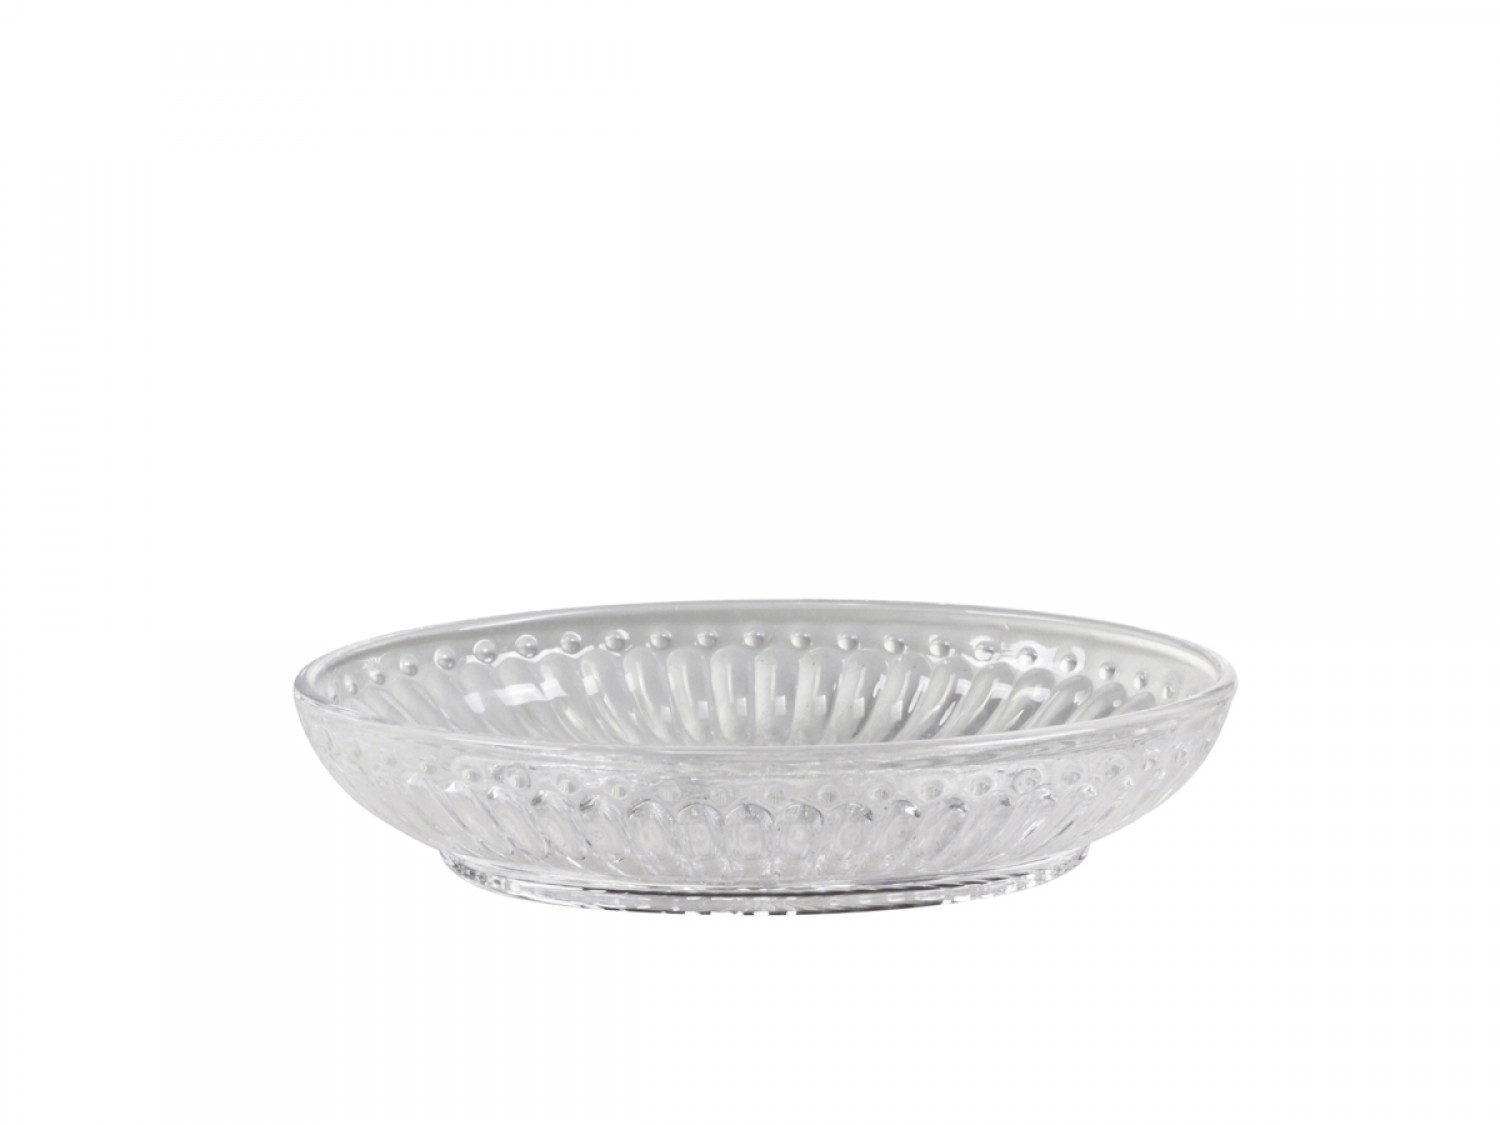 Soap Dish with grooves